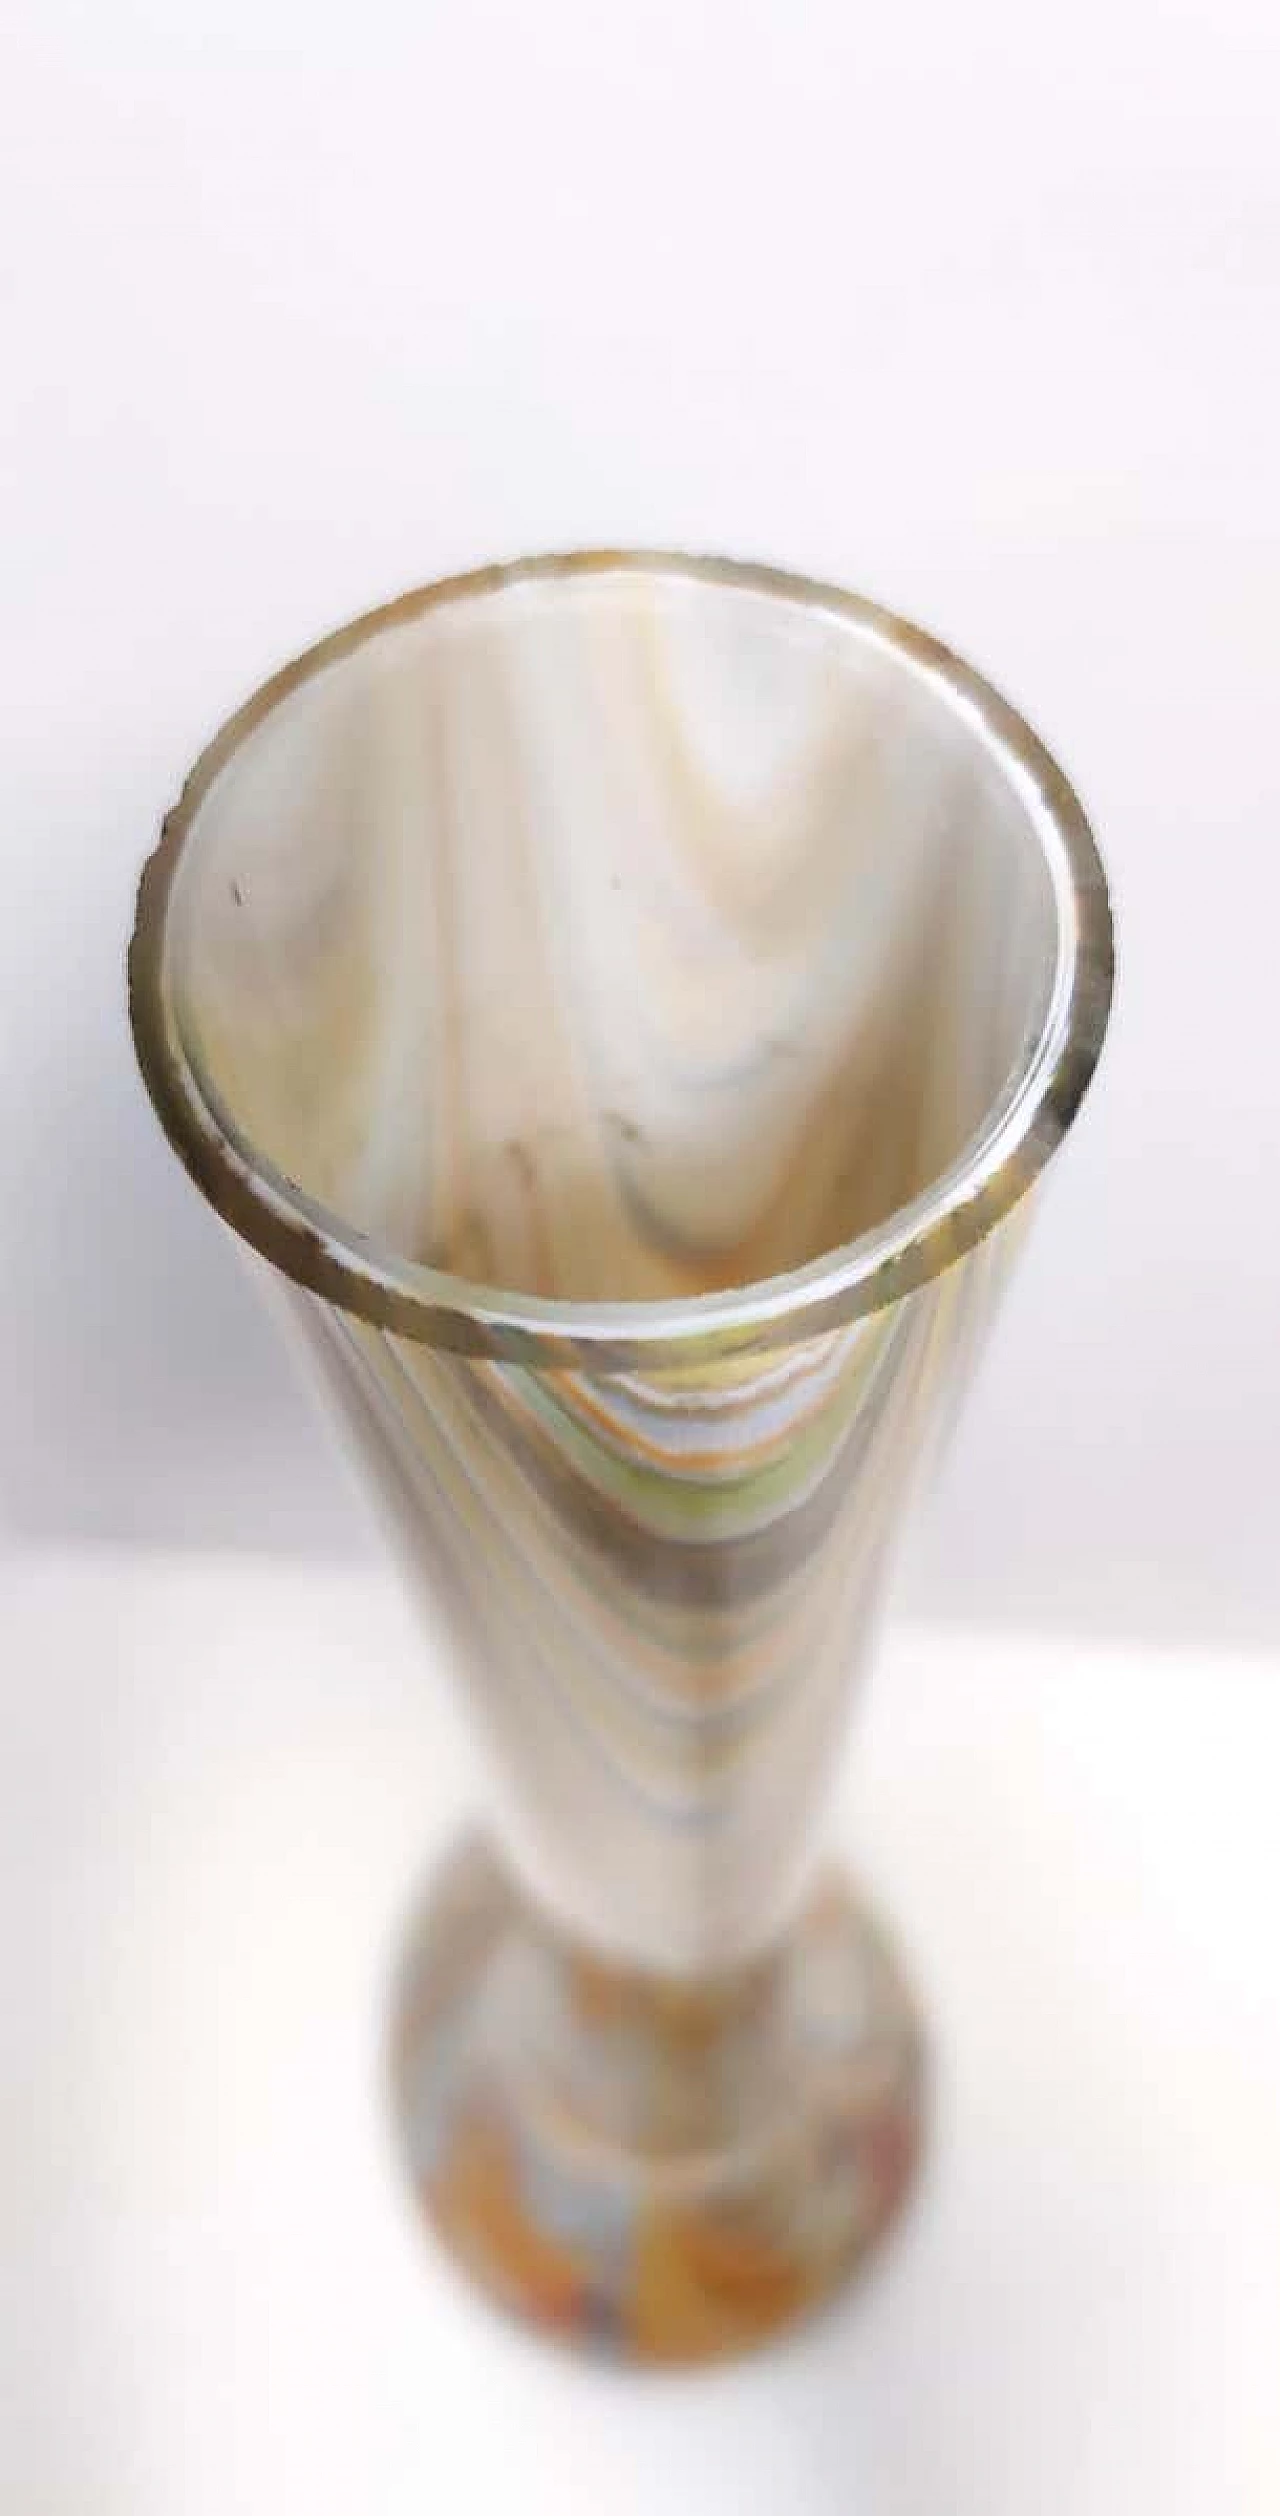 Phoenician orange glass vase attributed to Fratelli Toso, 1960s 21